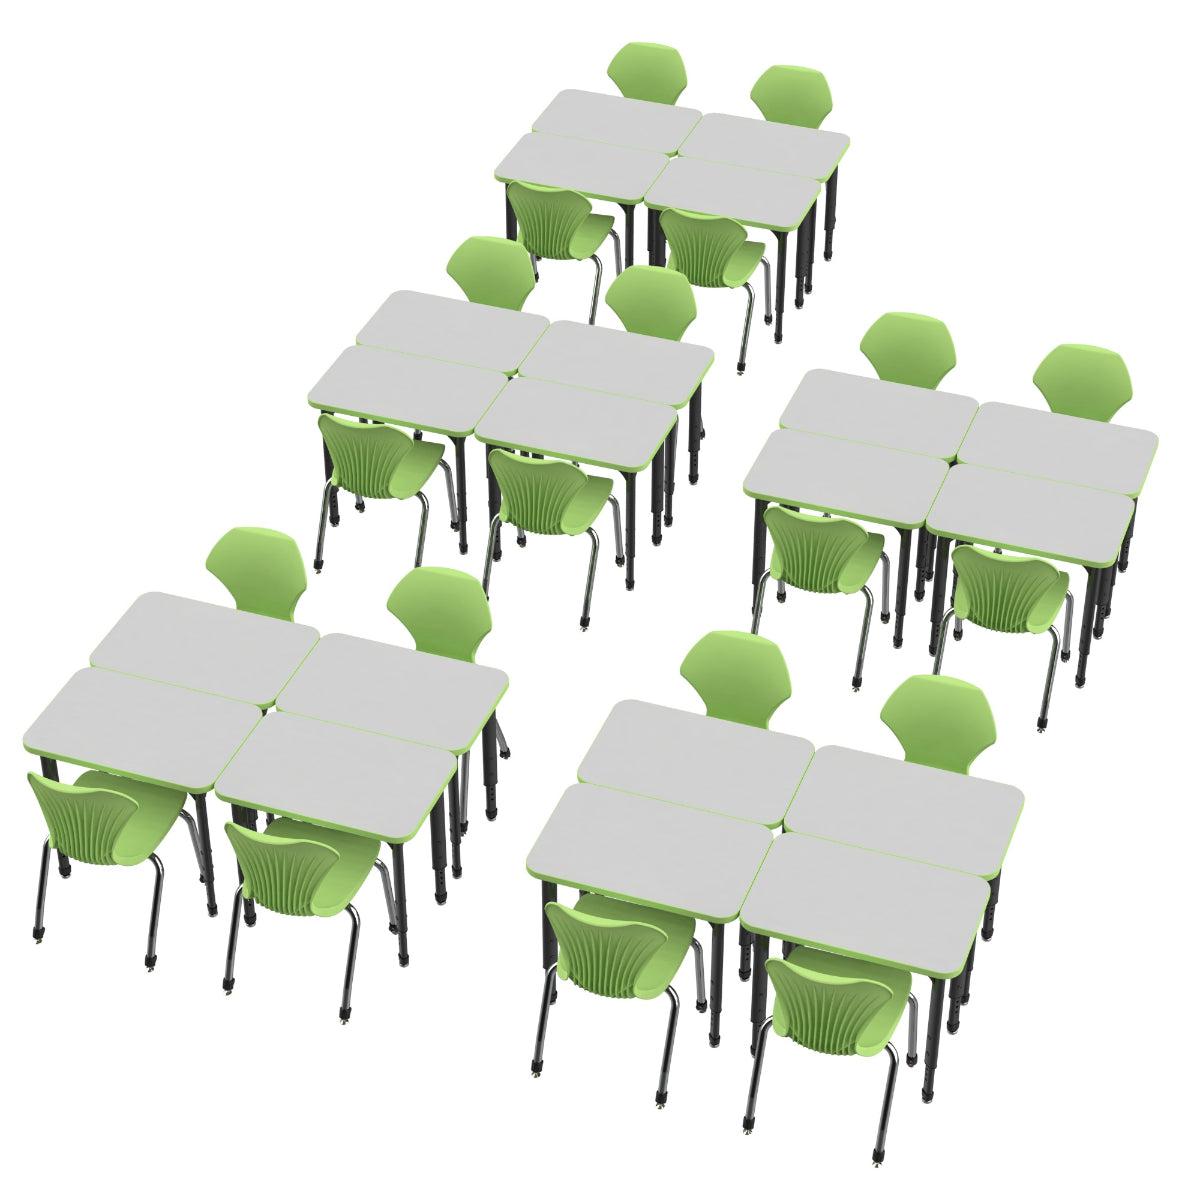 Apex Dry Erase Classroom Desk and Chair Package, 20 Rectangle Collaborative Student Desks, 24" x 36", with 20 Apex Stack Chairs